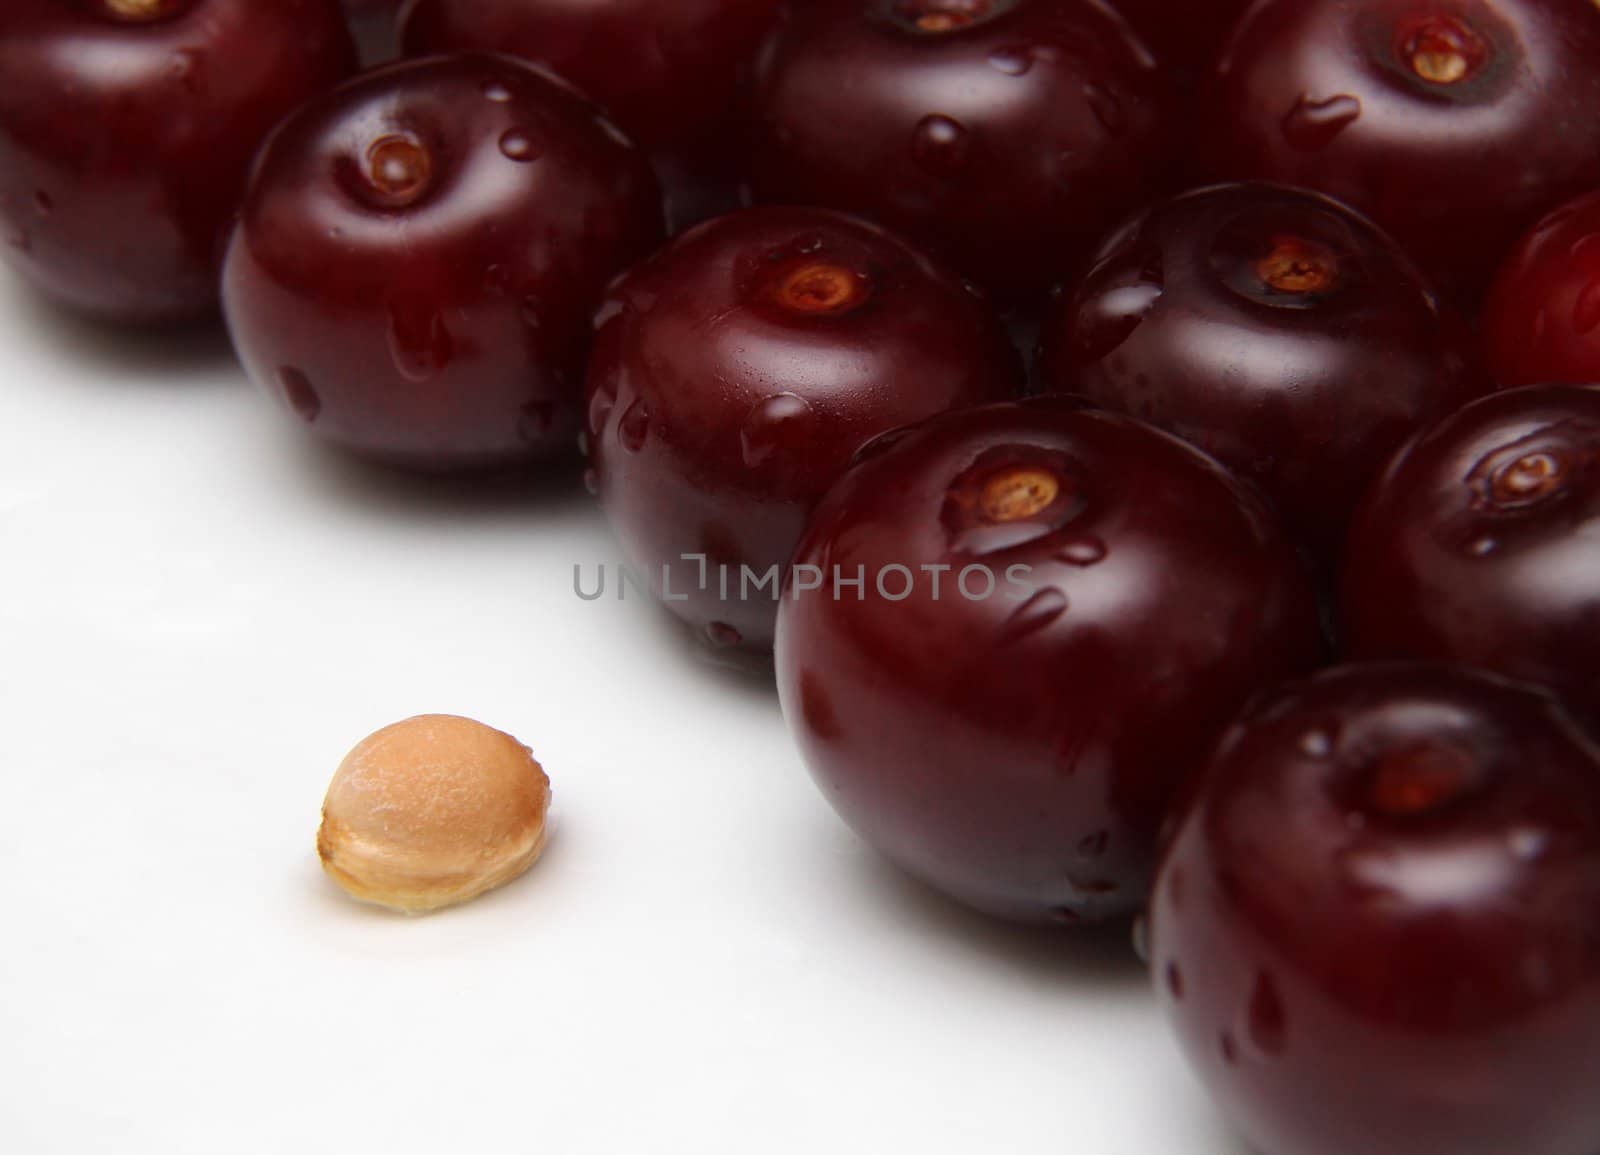 A group of cherries and a cherry seed.